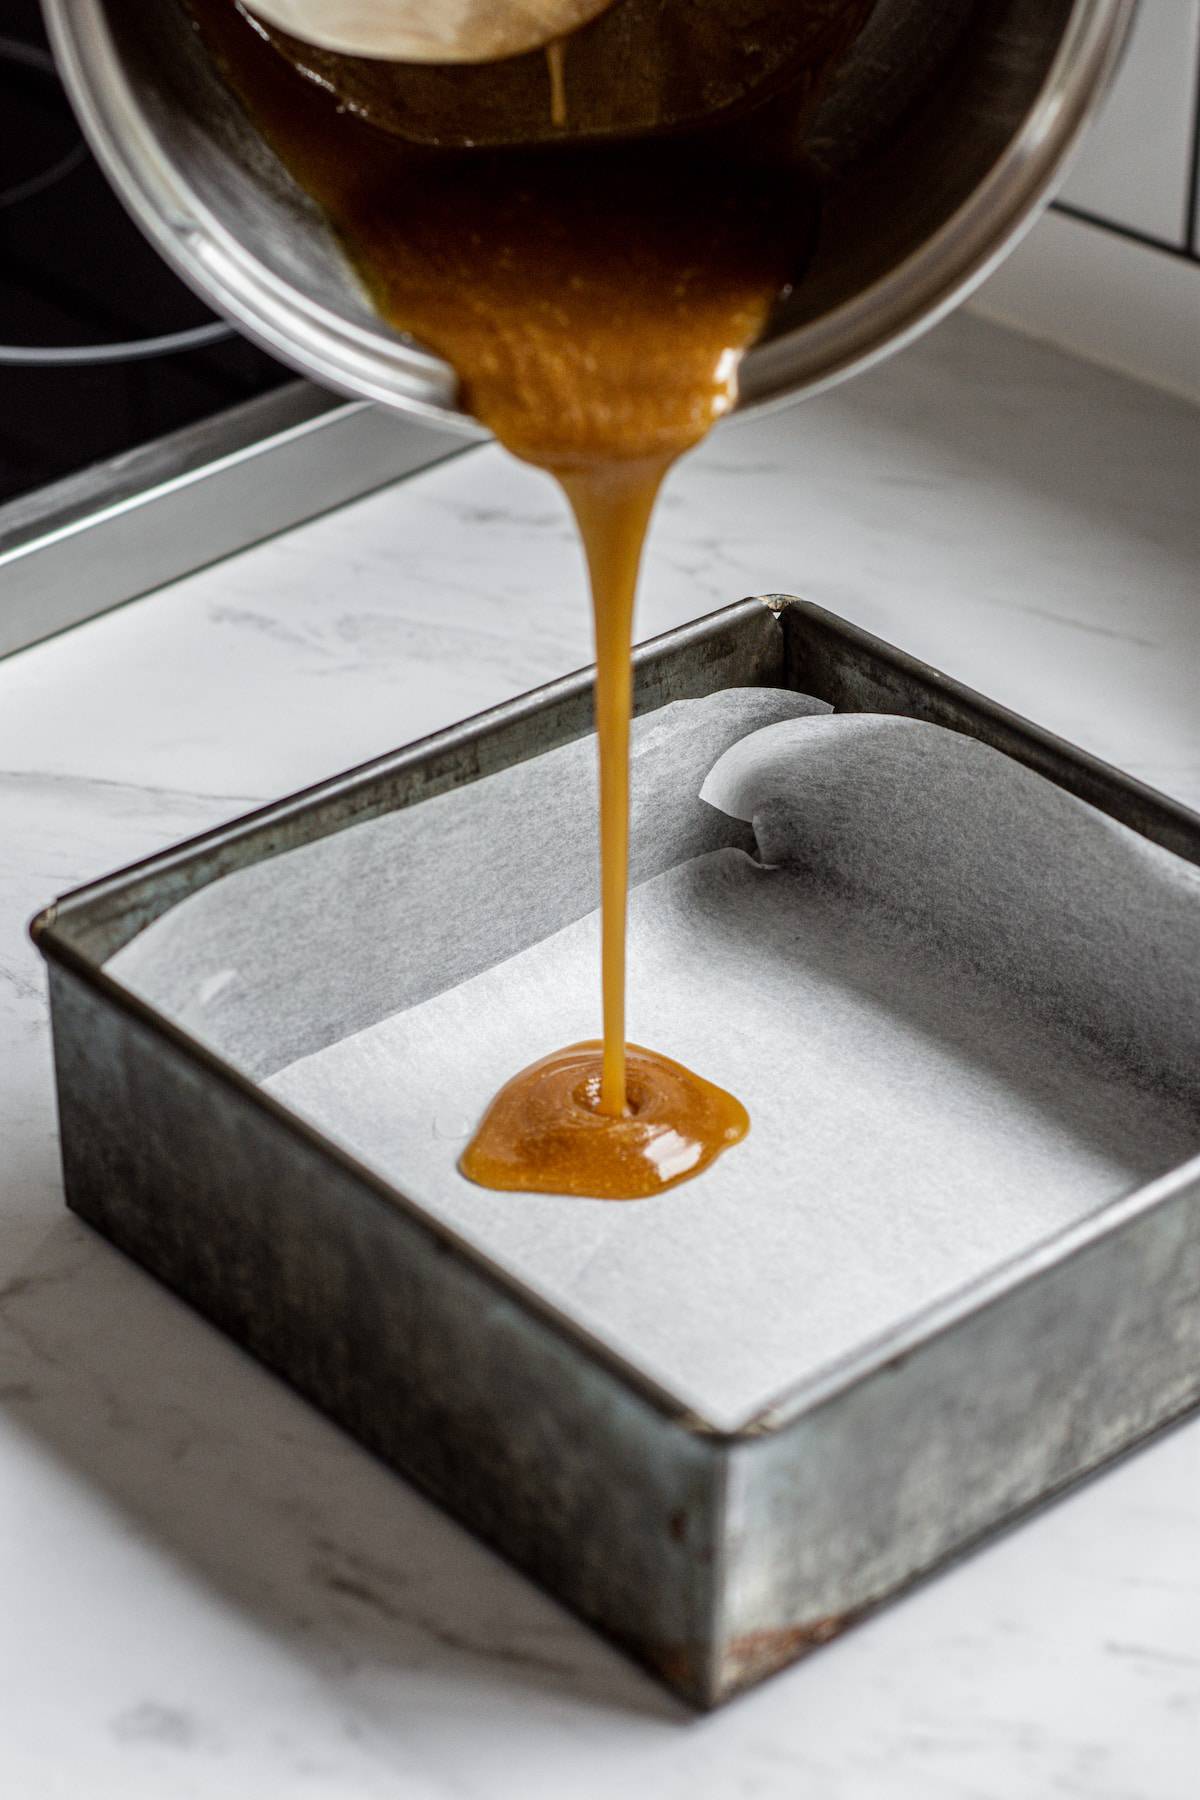 caramel being poured into a tray.